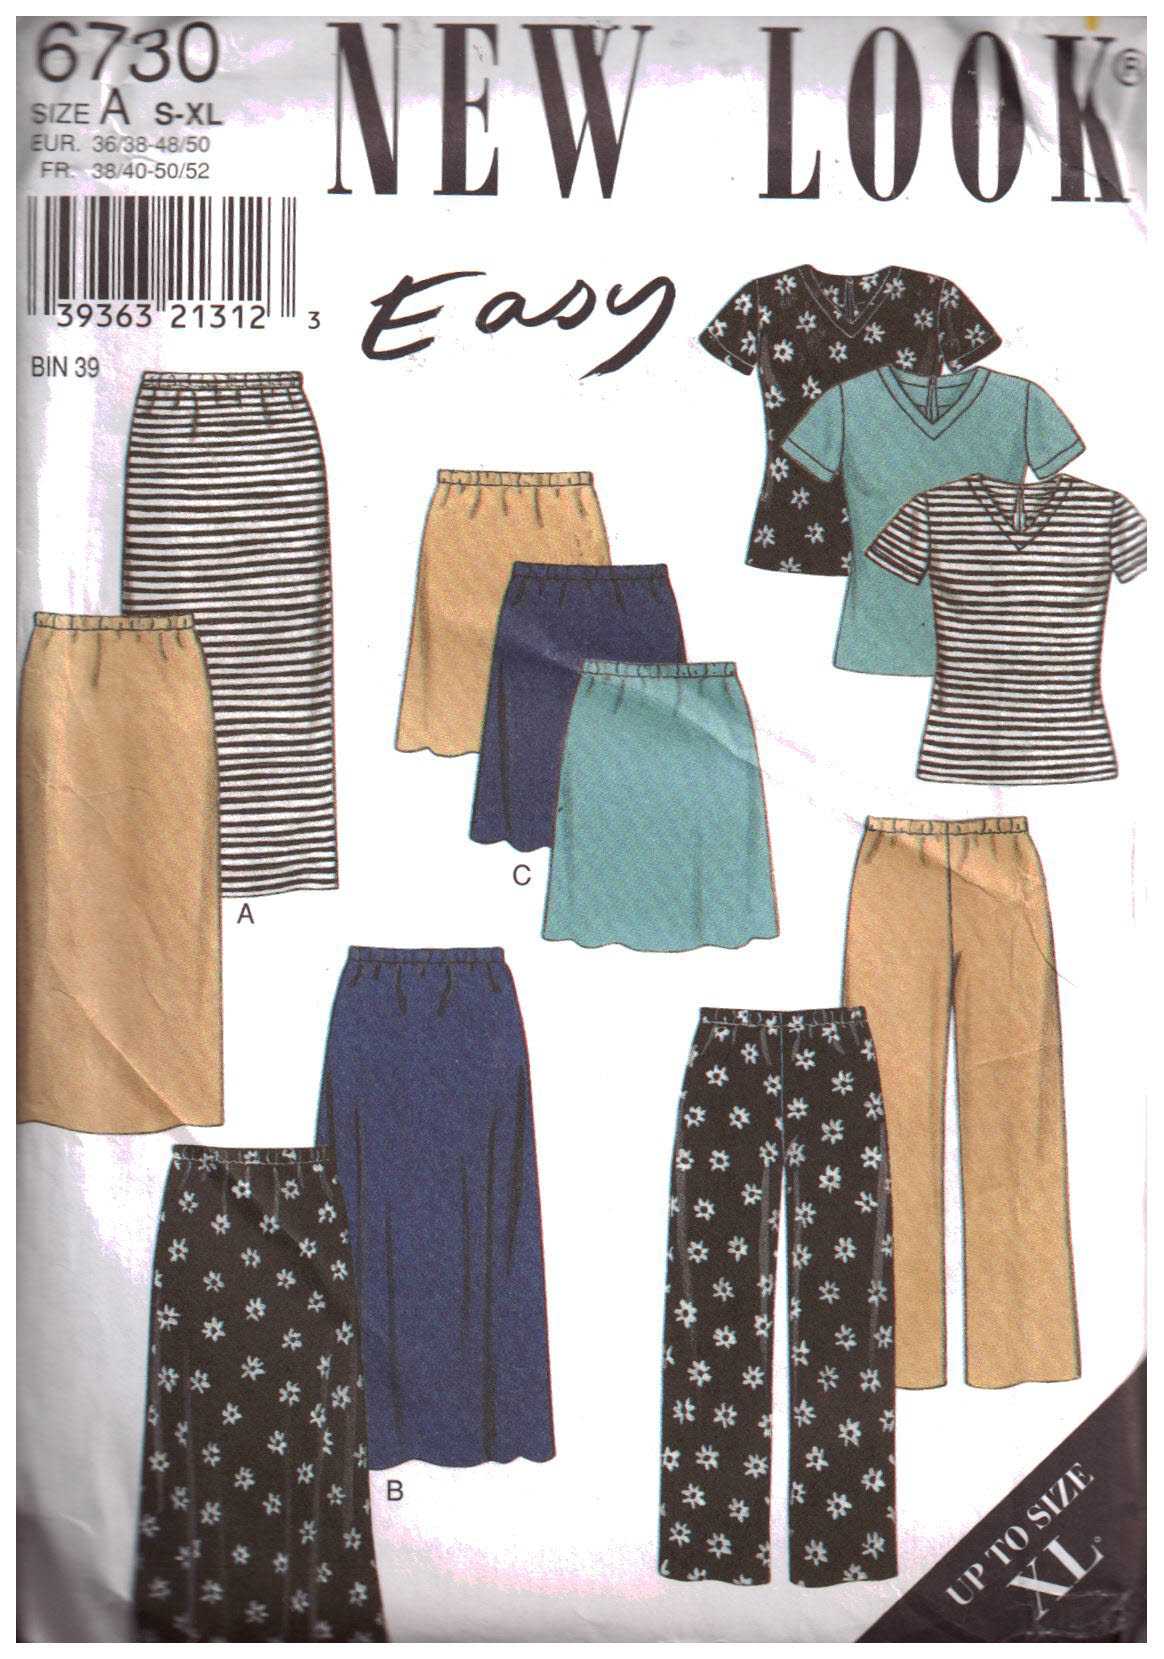 New Look 6730 Tops, Pants, Skirts Size: A S-XL Uncut Sewing Pattern